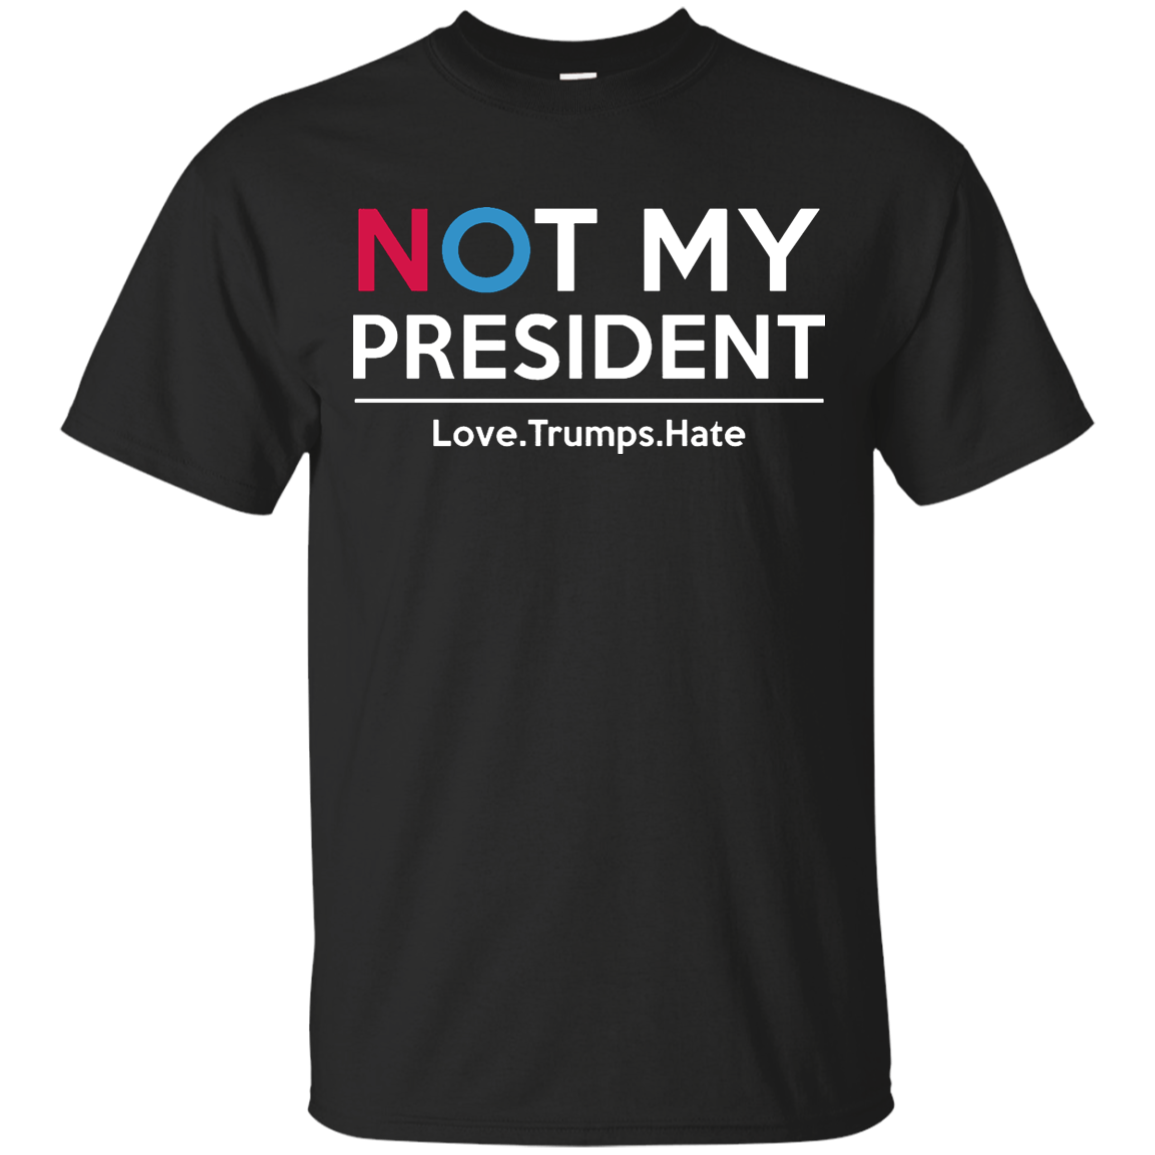 Not My President Shirt, Love.Trumps.Hate